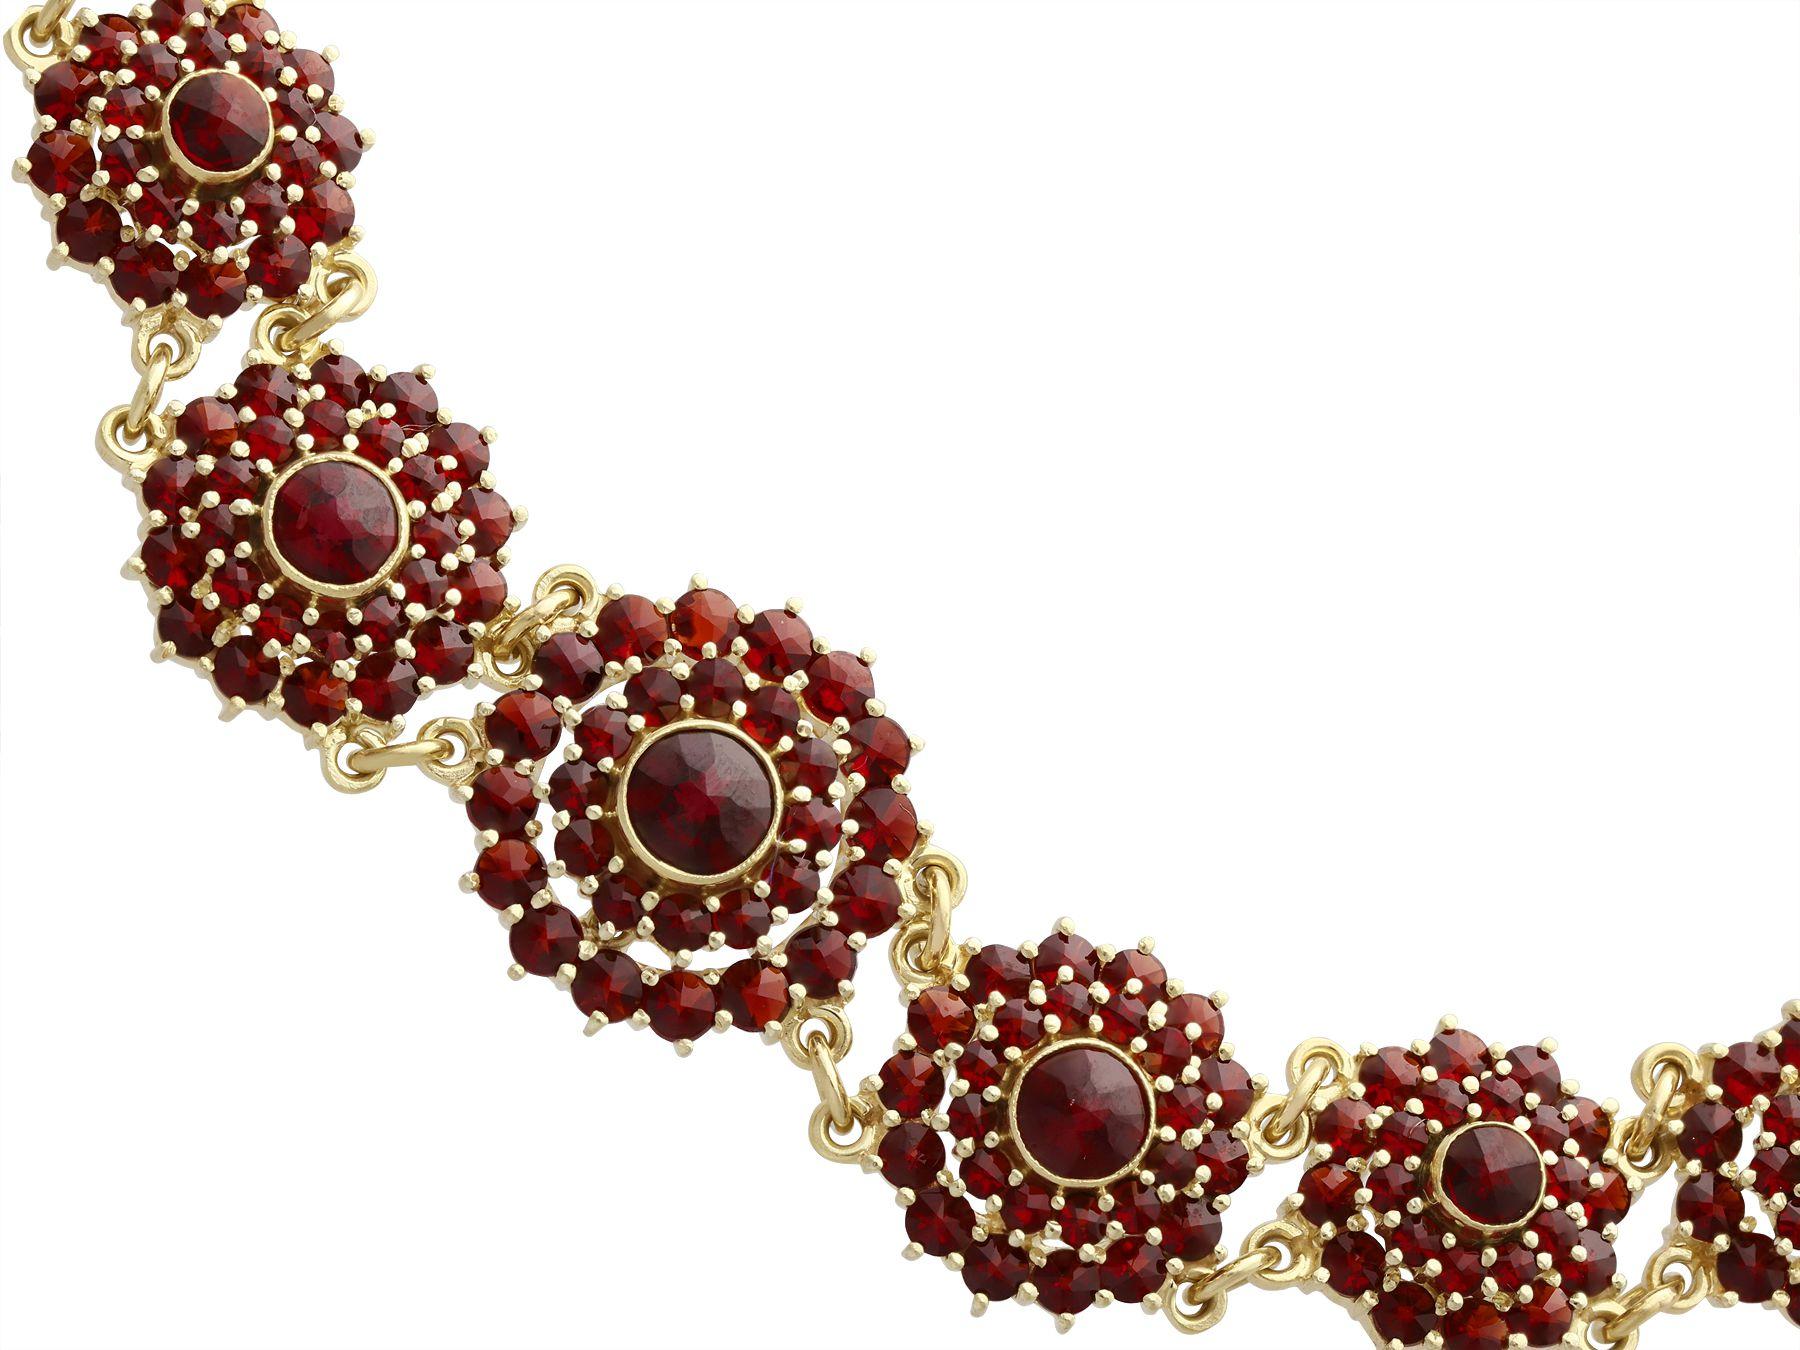 A fine and impressive vintage German 13.8 carat garnet and 14 karat yellow gold bracelet; part of our diverse antique jewelry and estate jewelry collections

This fine and impressive vintage gold bracelet has been crafted in 14k yellow gold.

The